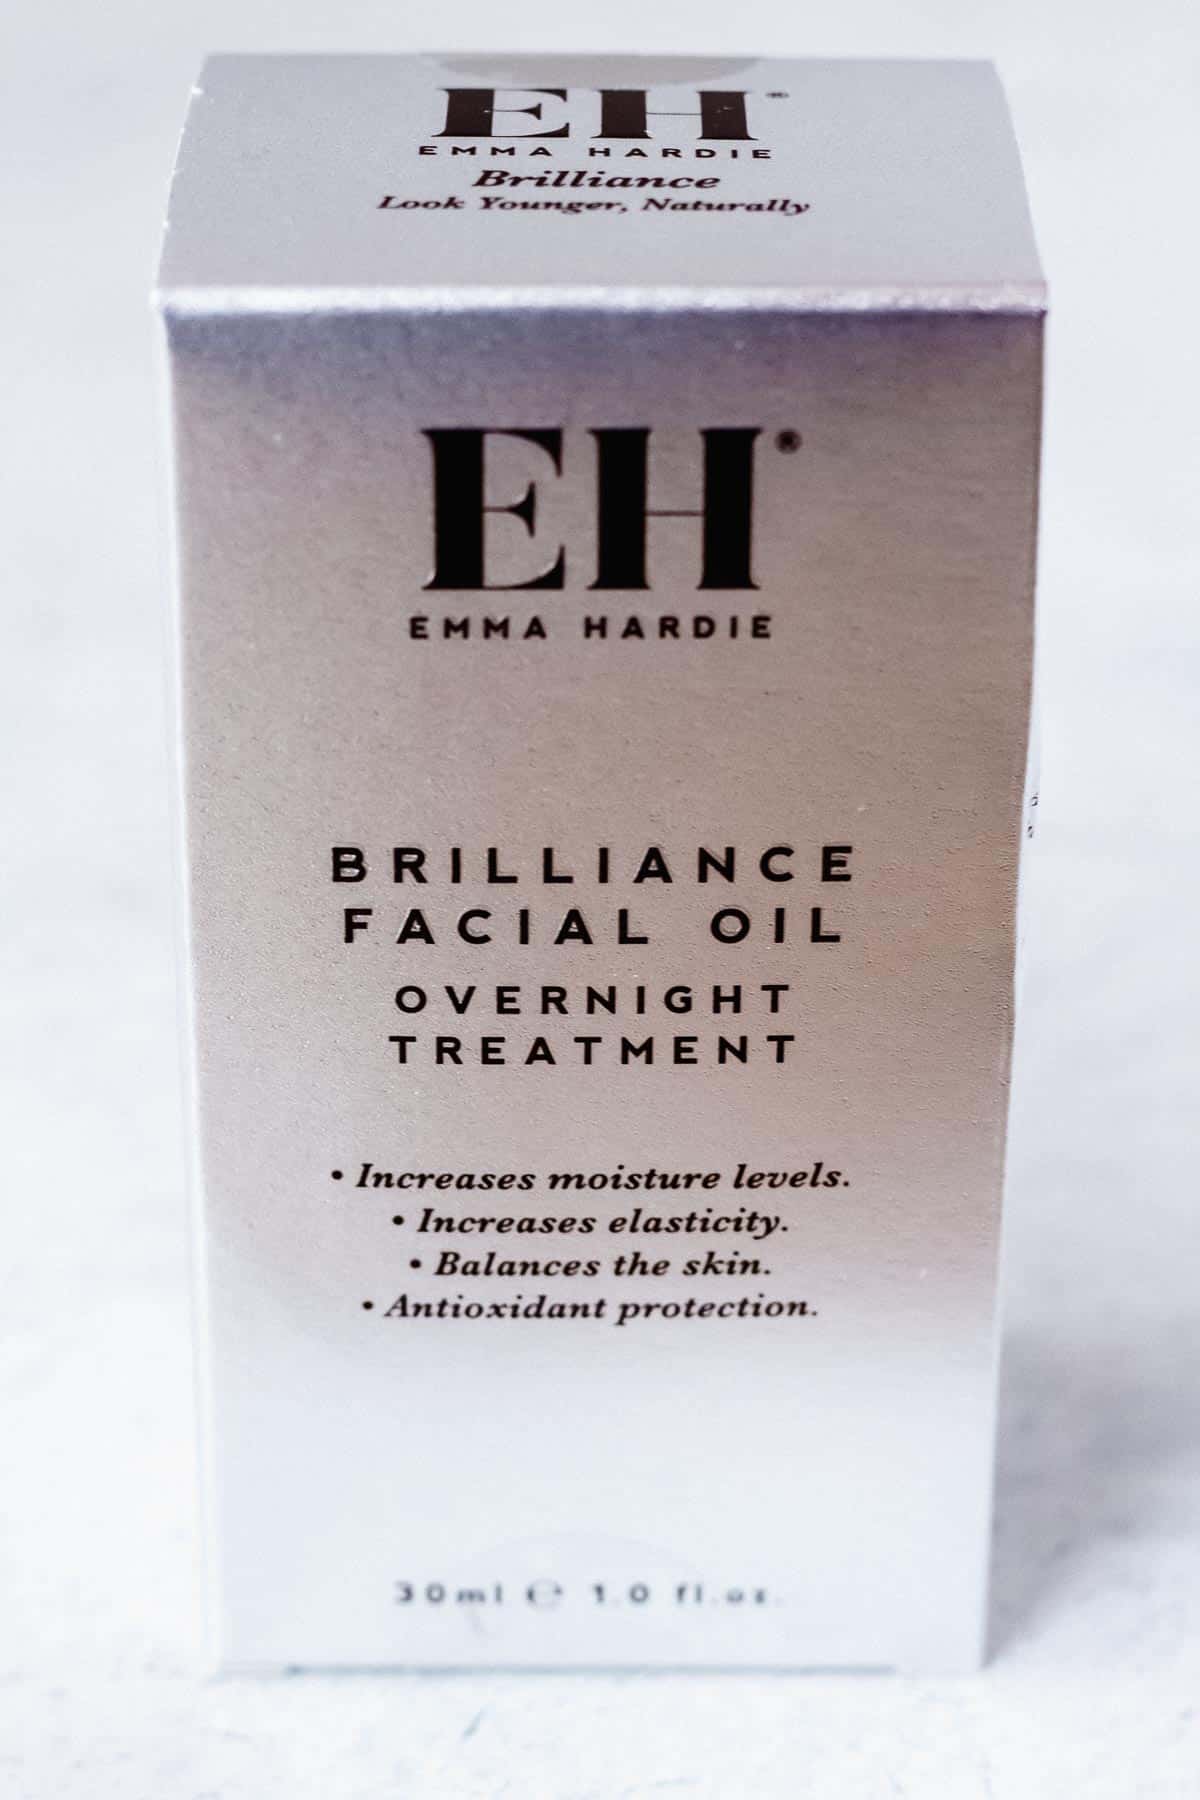 Emma Hardie Brilliance Facial Oil Overnight Treatment in a box on a white background